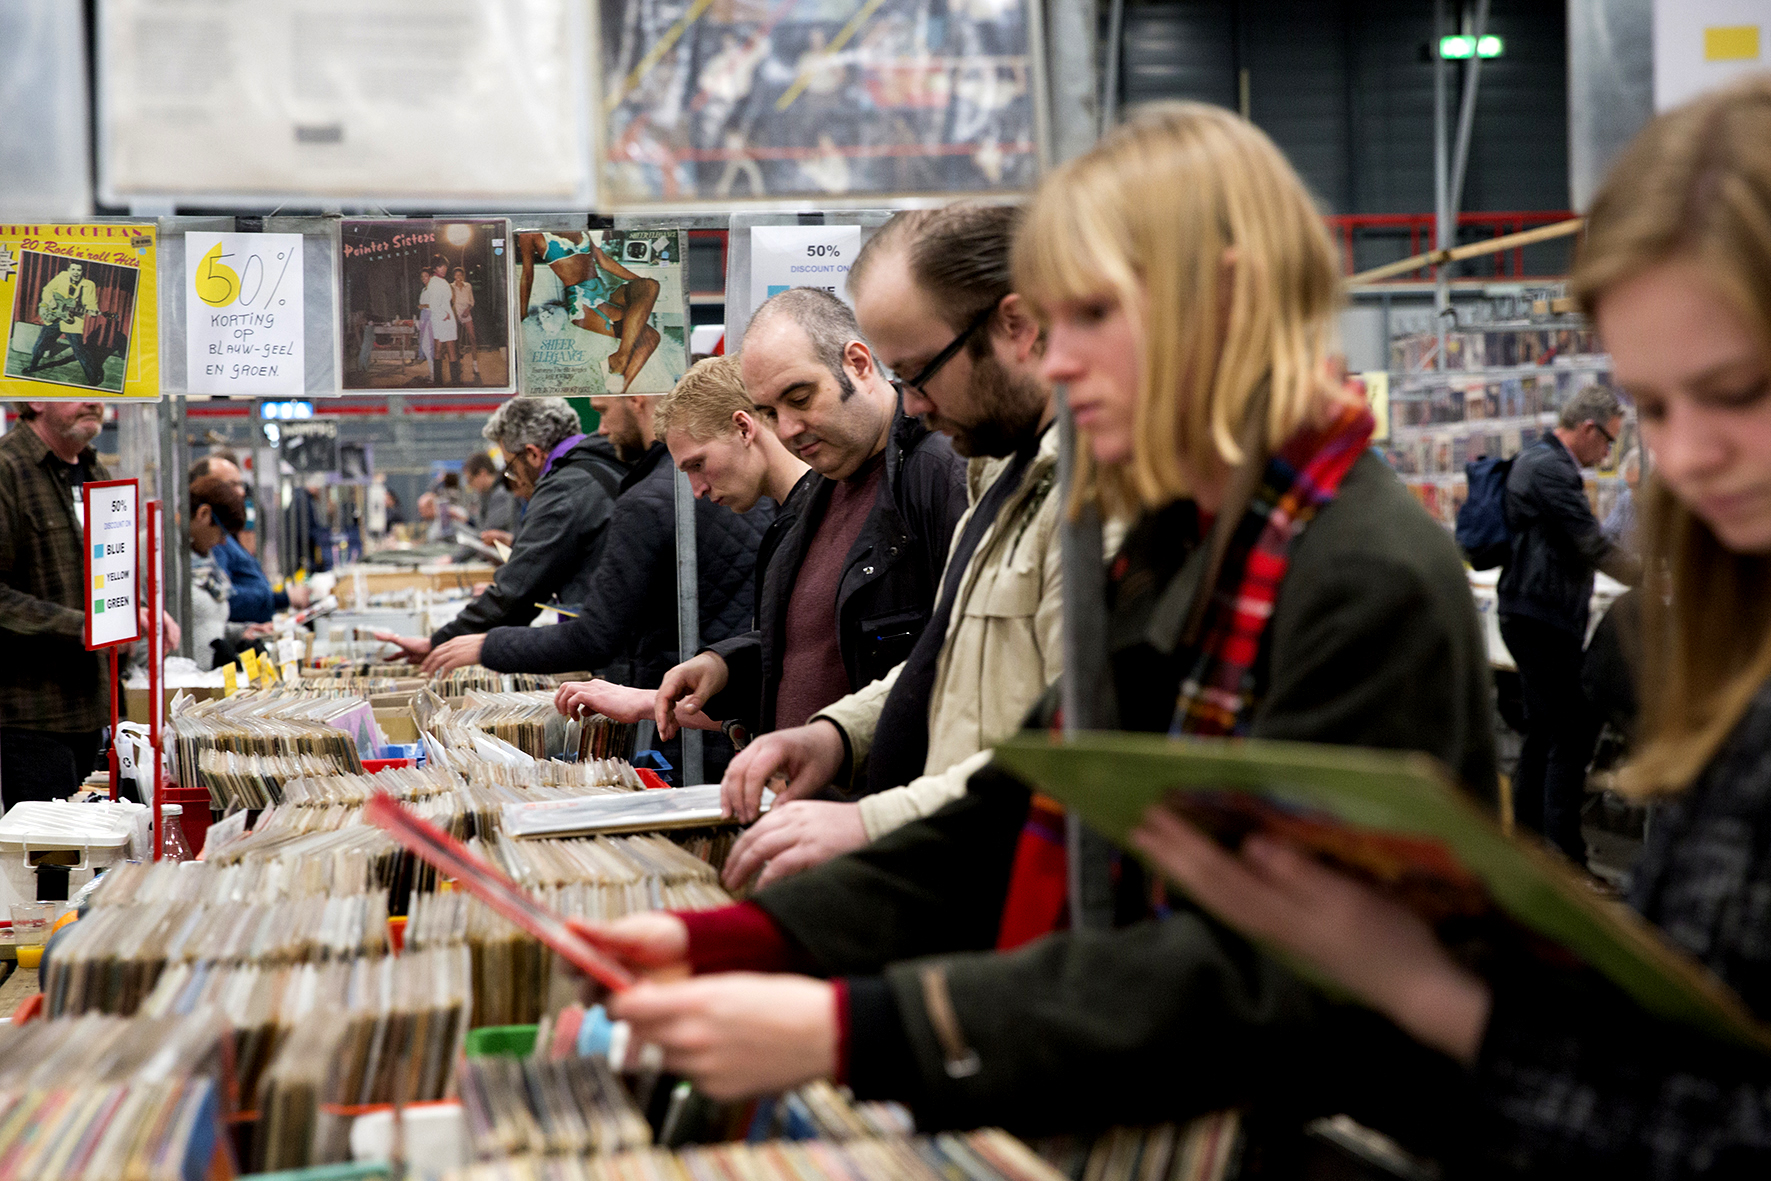 World's Largest Record Fair Happening in Utrecht During LGW17